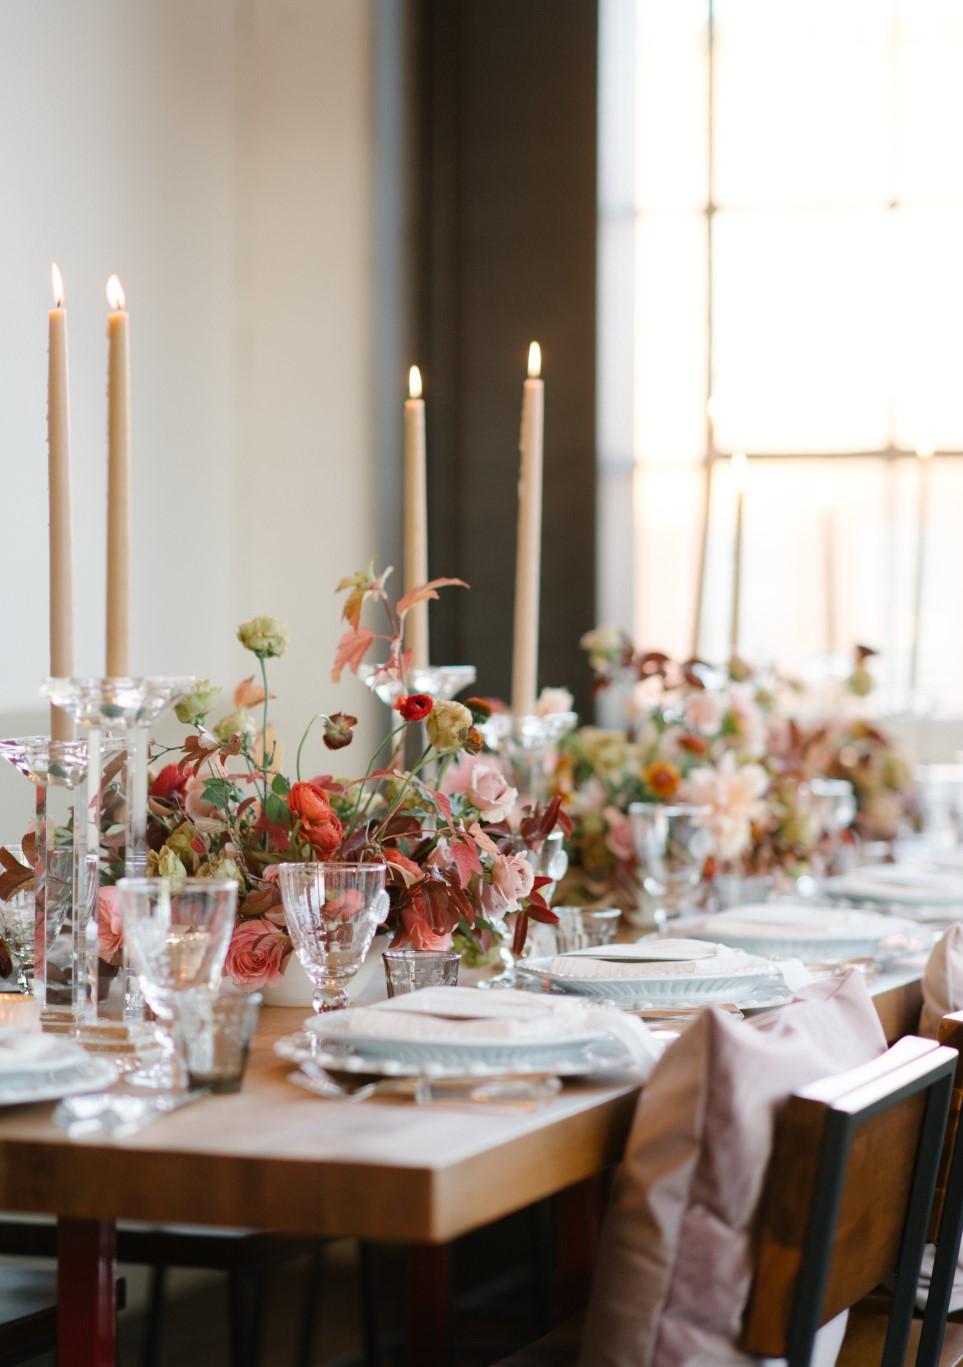 From intimate dinners to standing dance parties, the space can beautifully